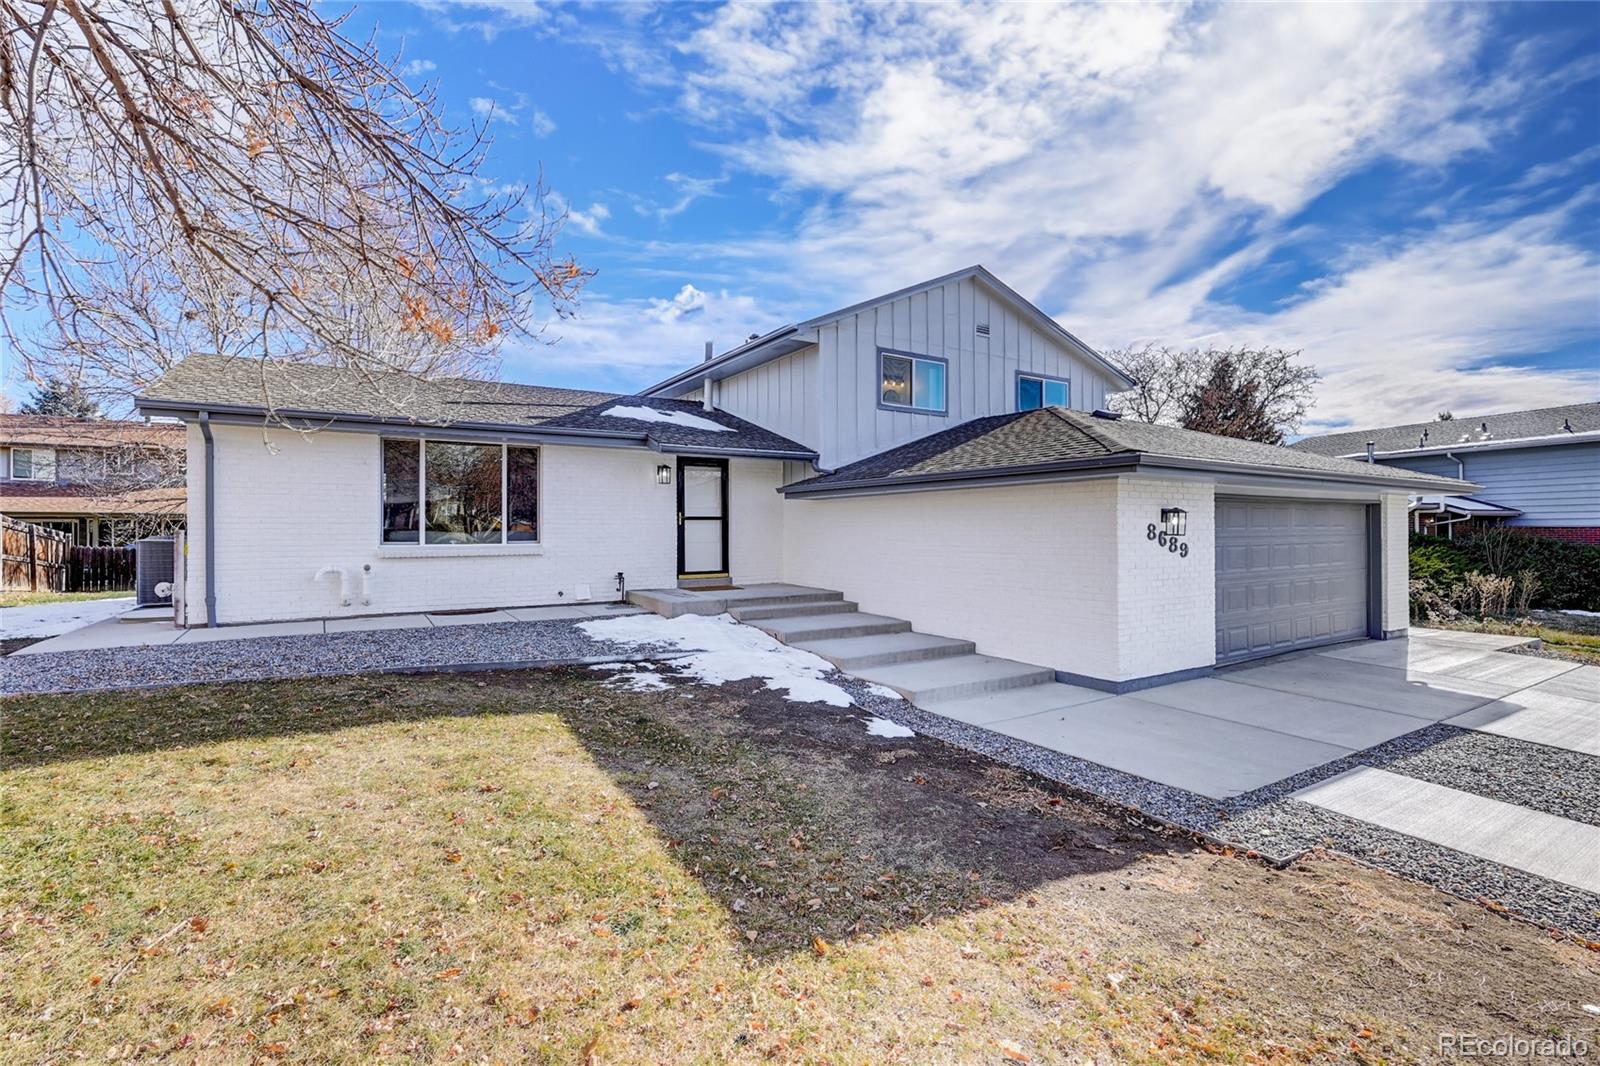 8689 w 84th circle, Arvada sold home. Closed on 2024-03-01 for $789,000.